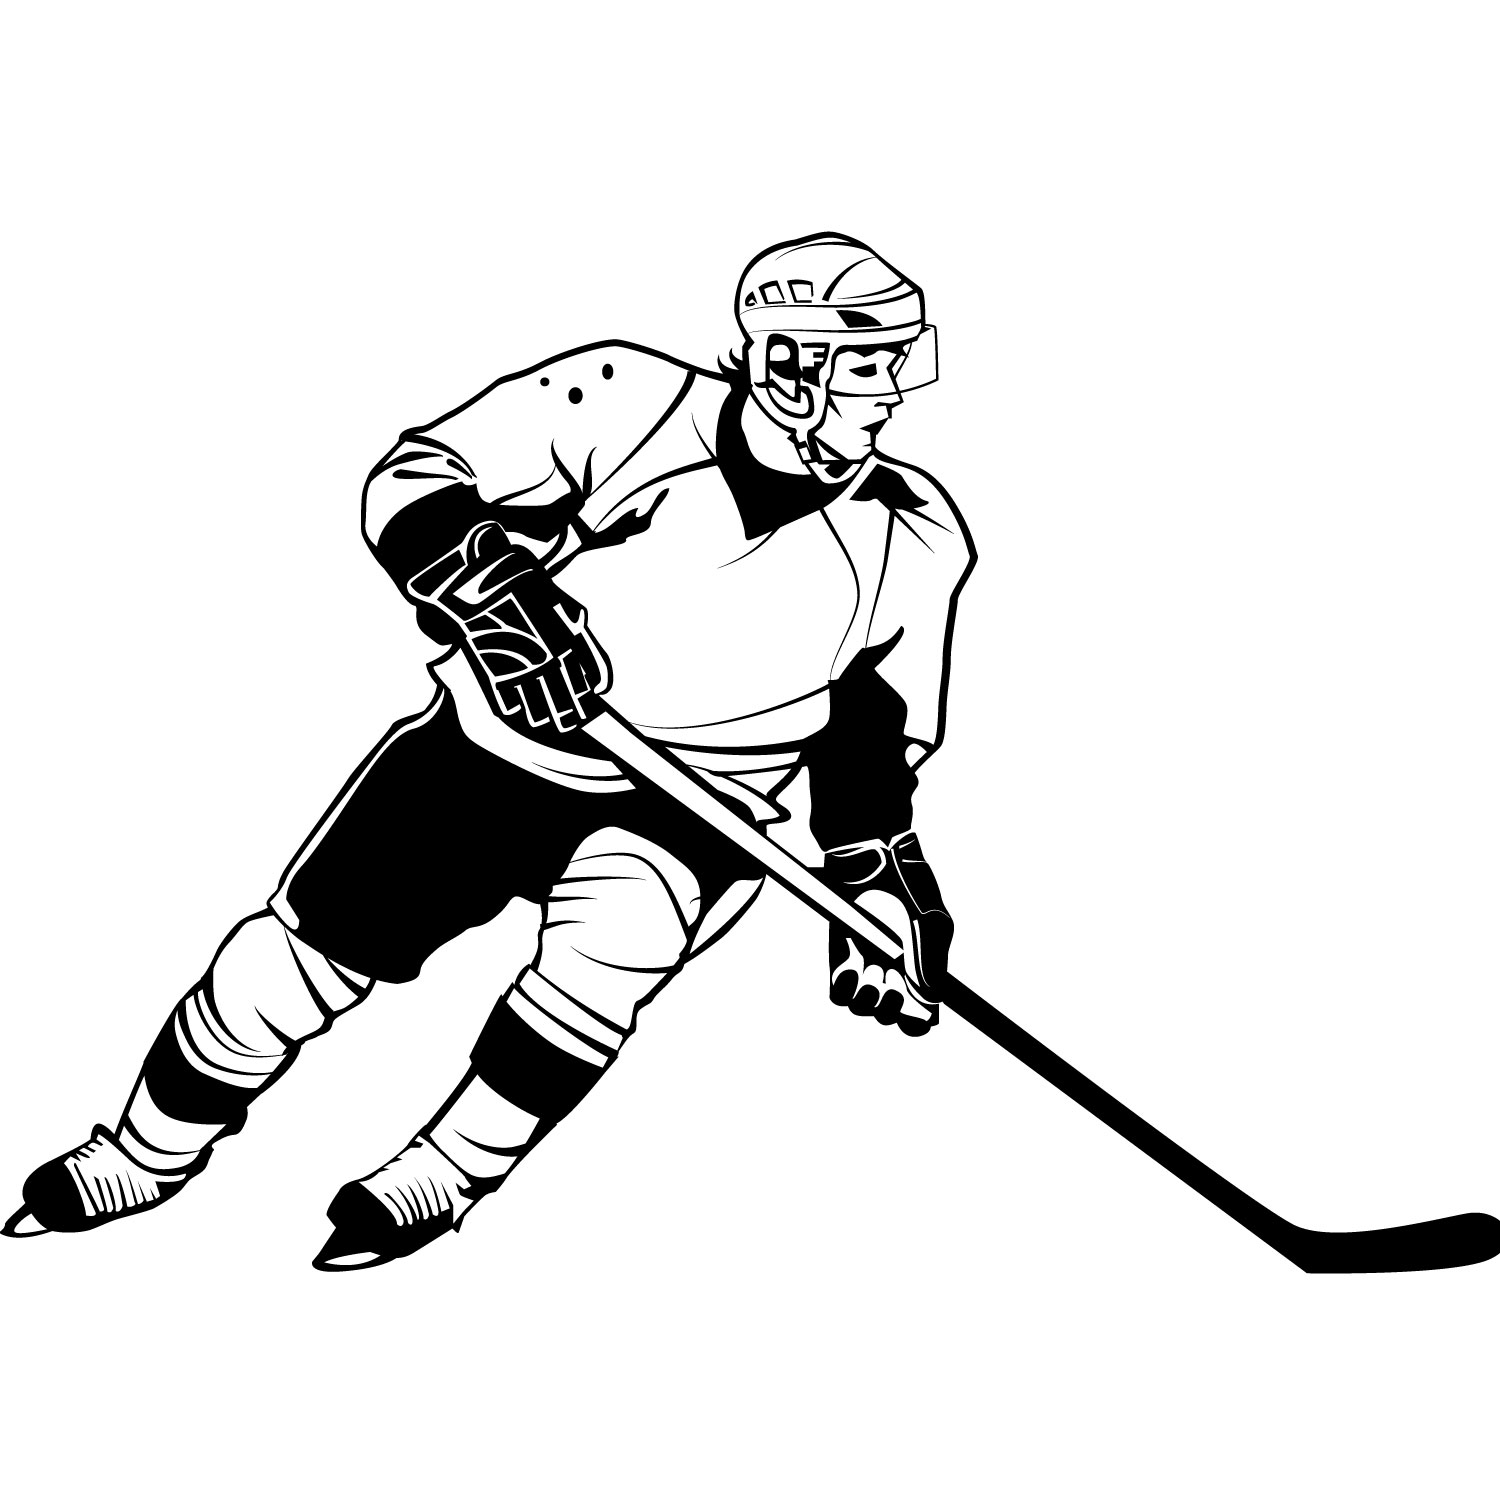 Hockey Clip Art Images Free   Clipart Panda   Free Clipart Images